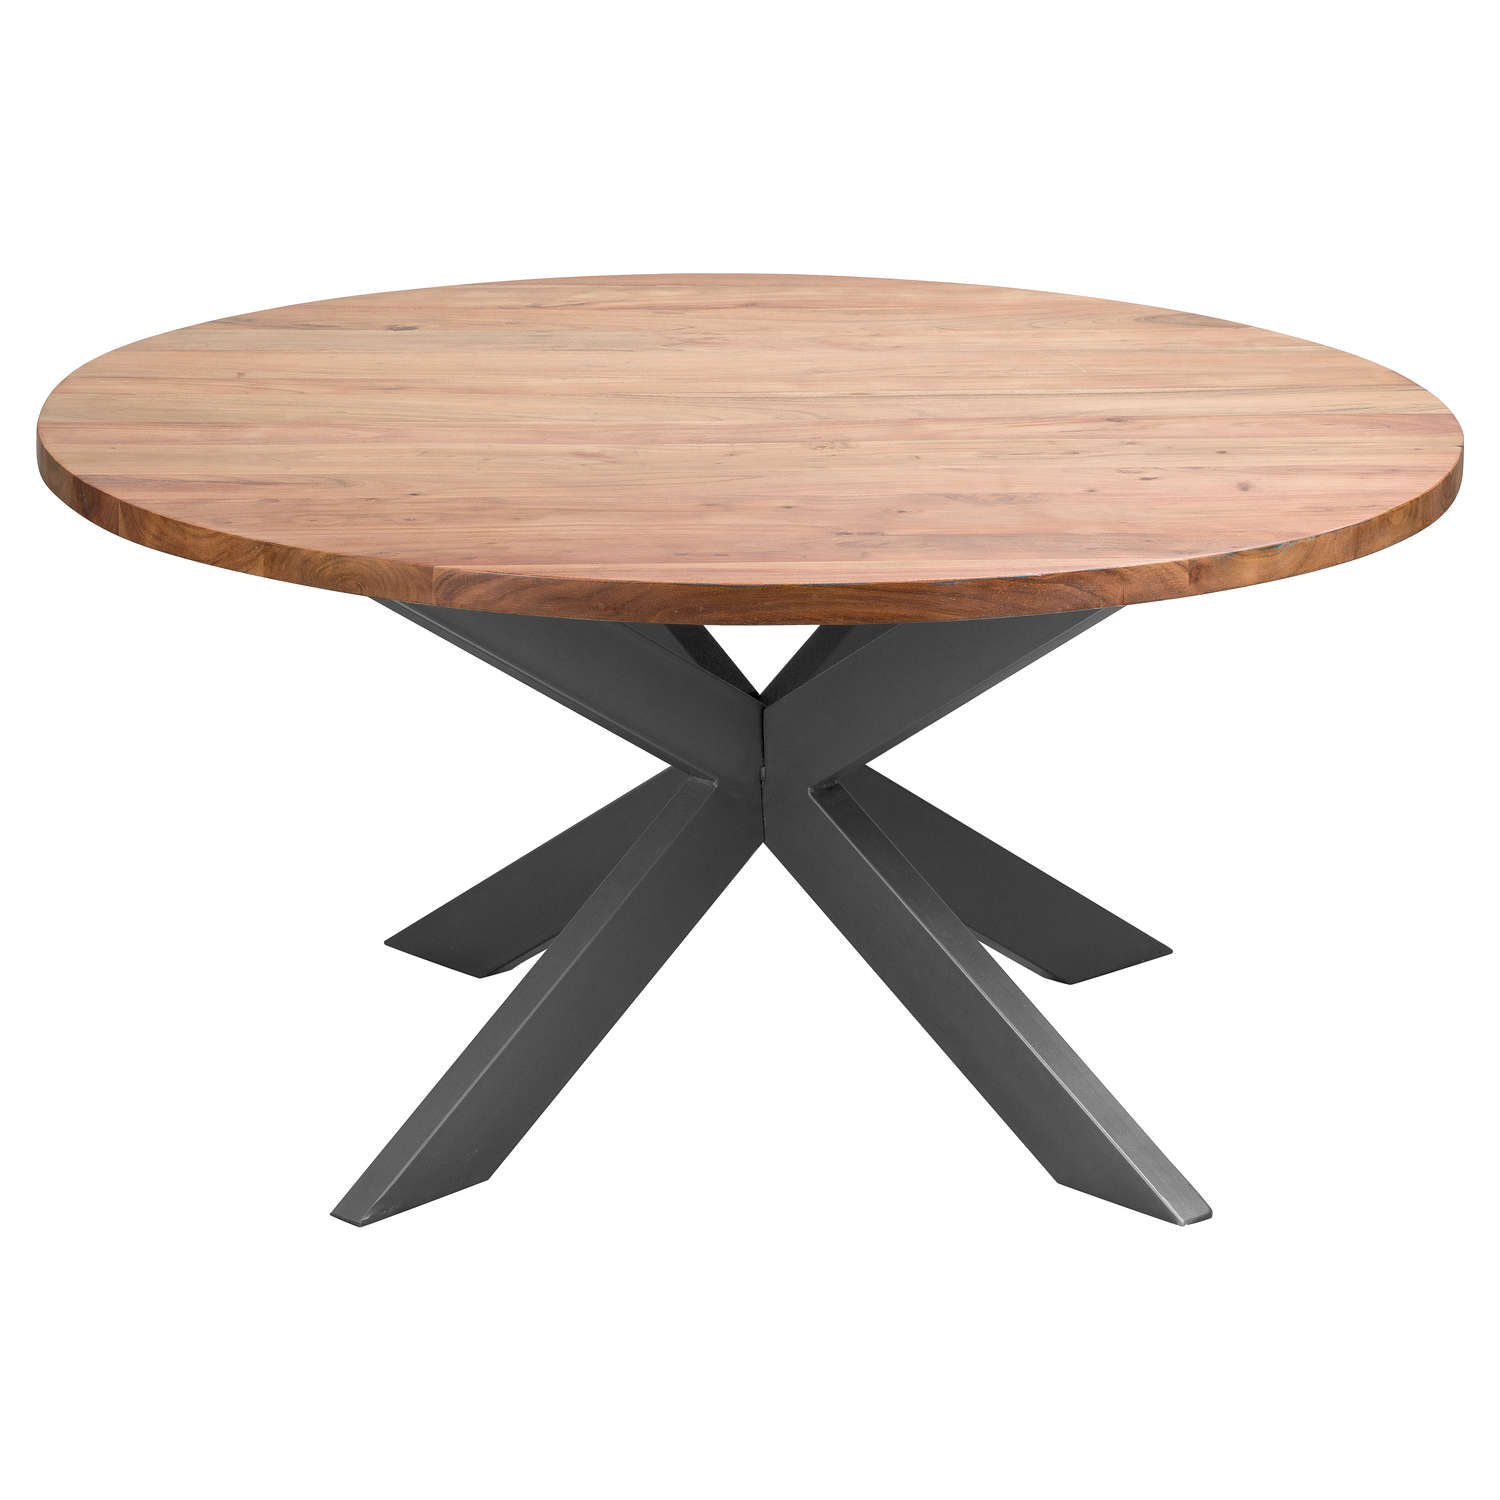 Live Edge Collection Large Round Dining Table - Image 1